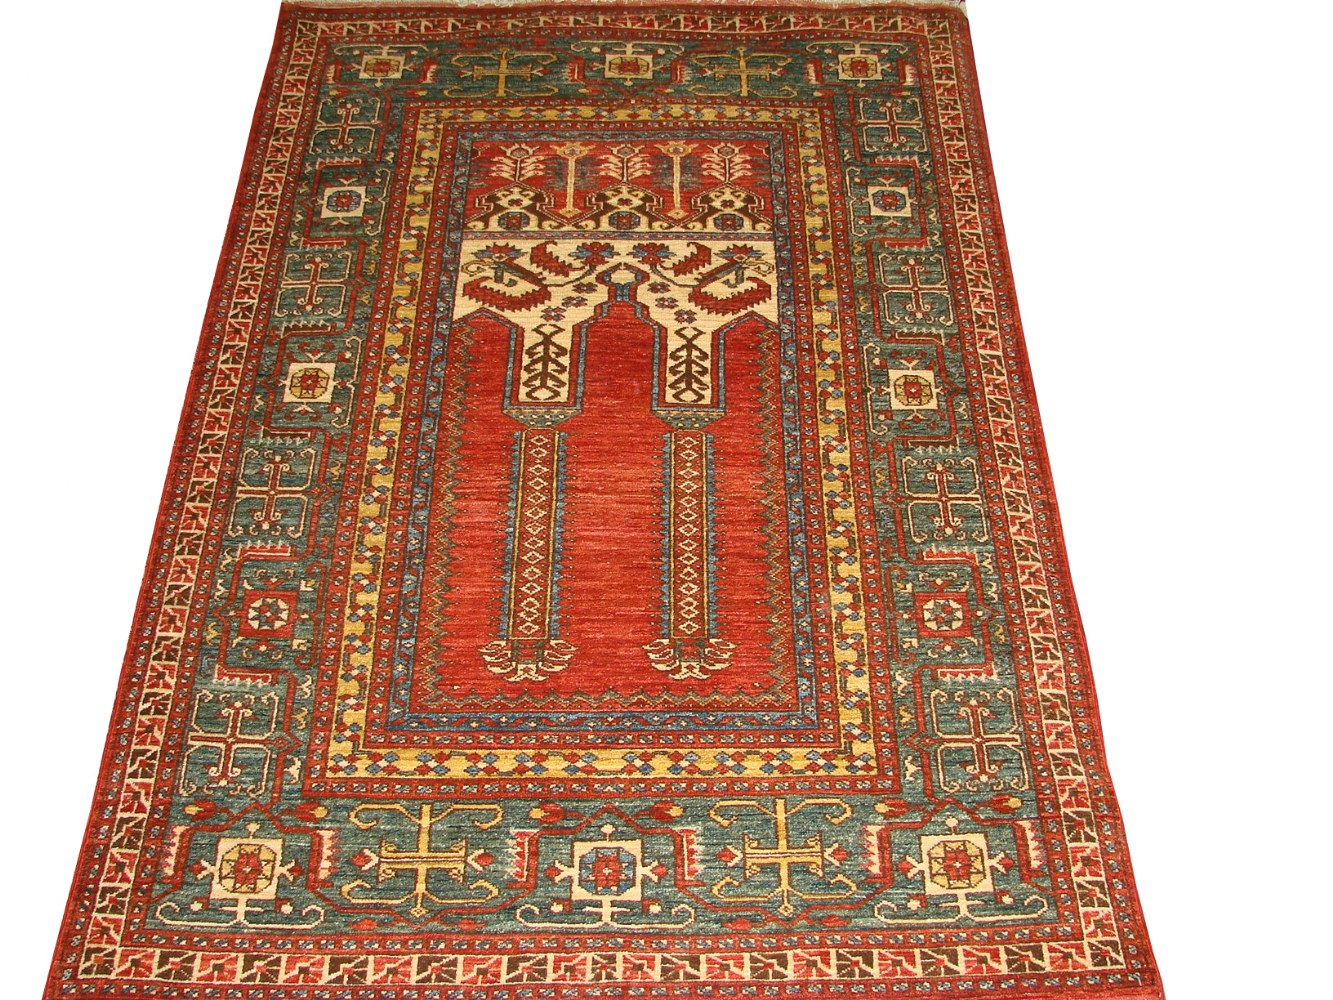 4x6 Antique Revival Hand Knotted Wool Area Rug - MR11116